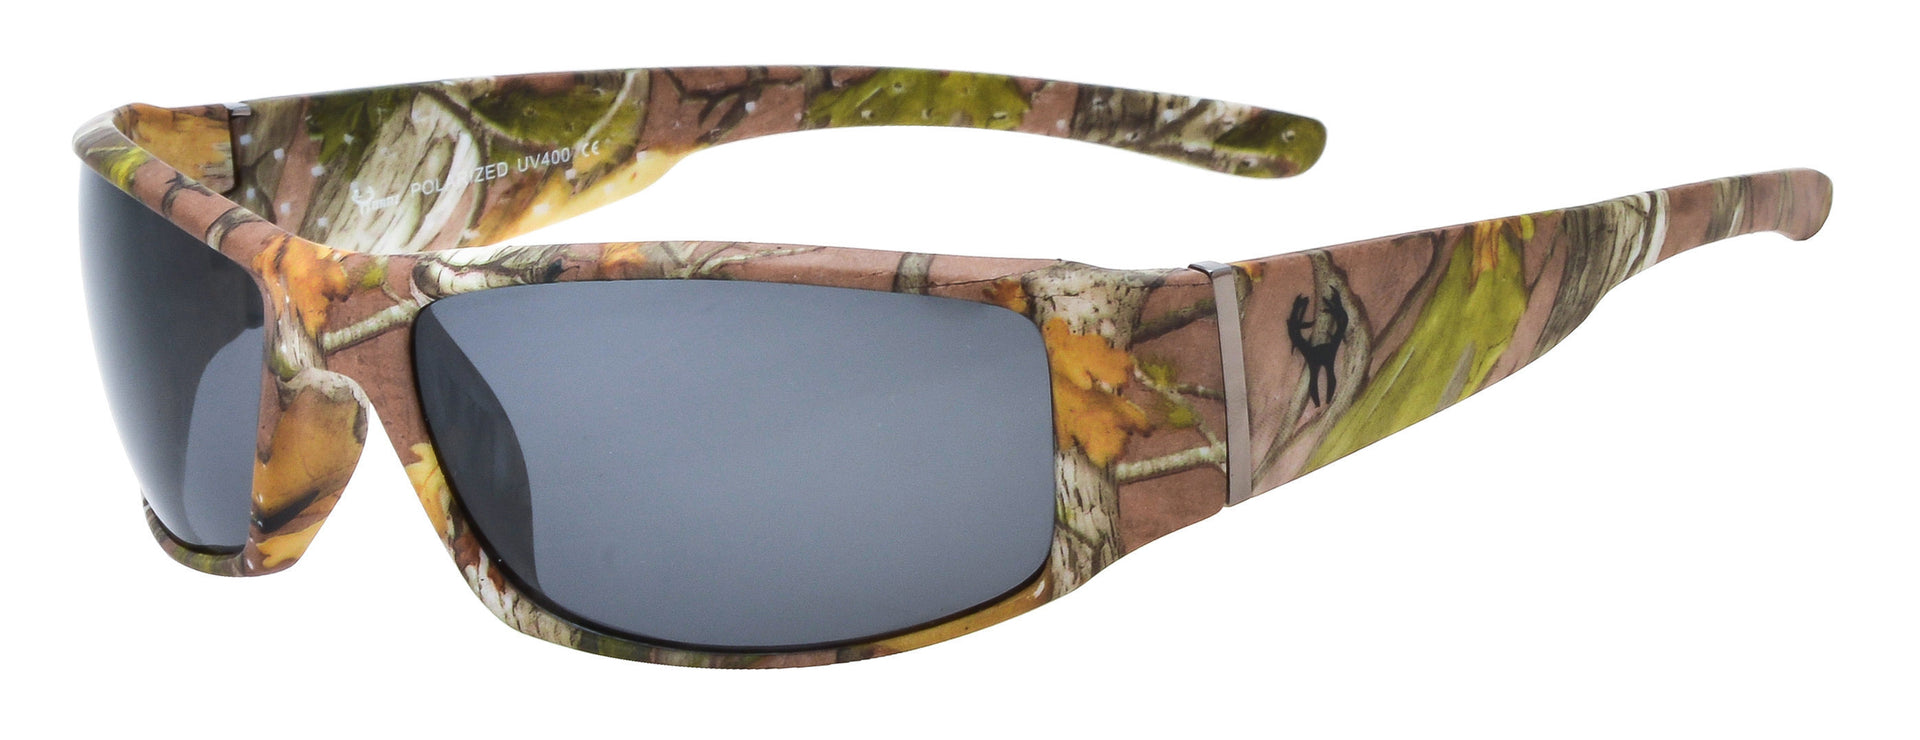 Hornz Brown Forest Camouflage Polarized Sunglasses for Men - Whitetail - Free Matching Microfiber Pouch